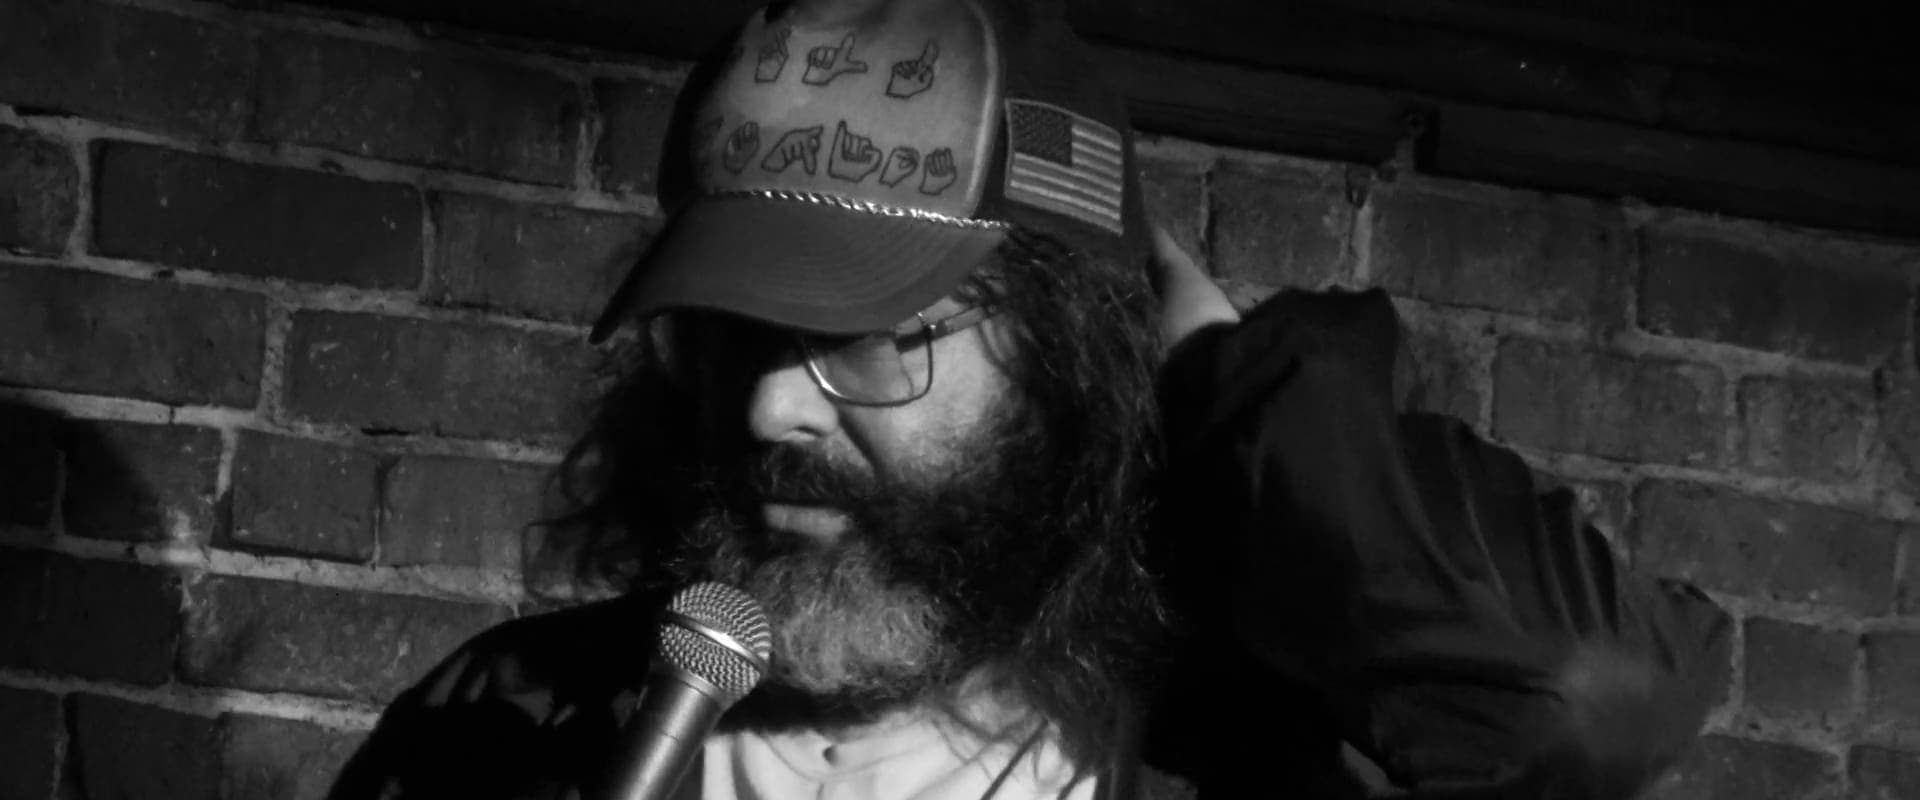 Judah Friedlander: America Is the Greatest Country in the United States